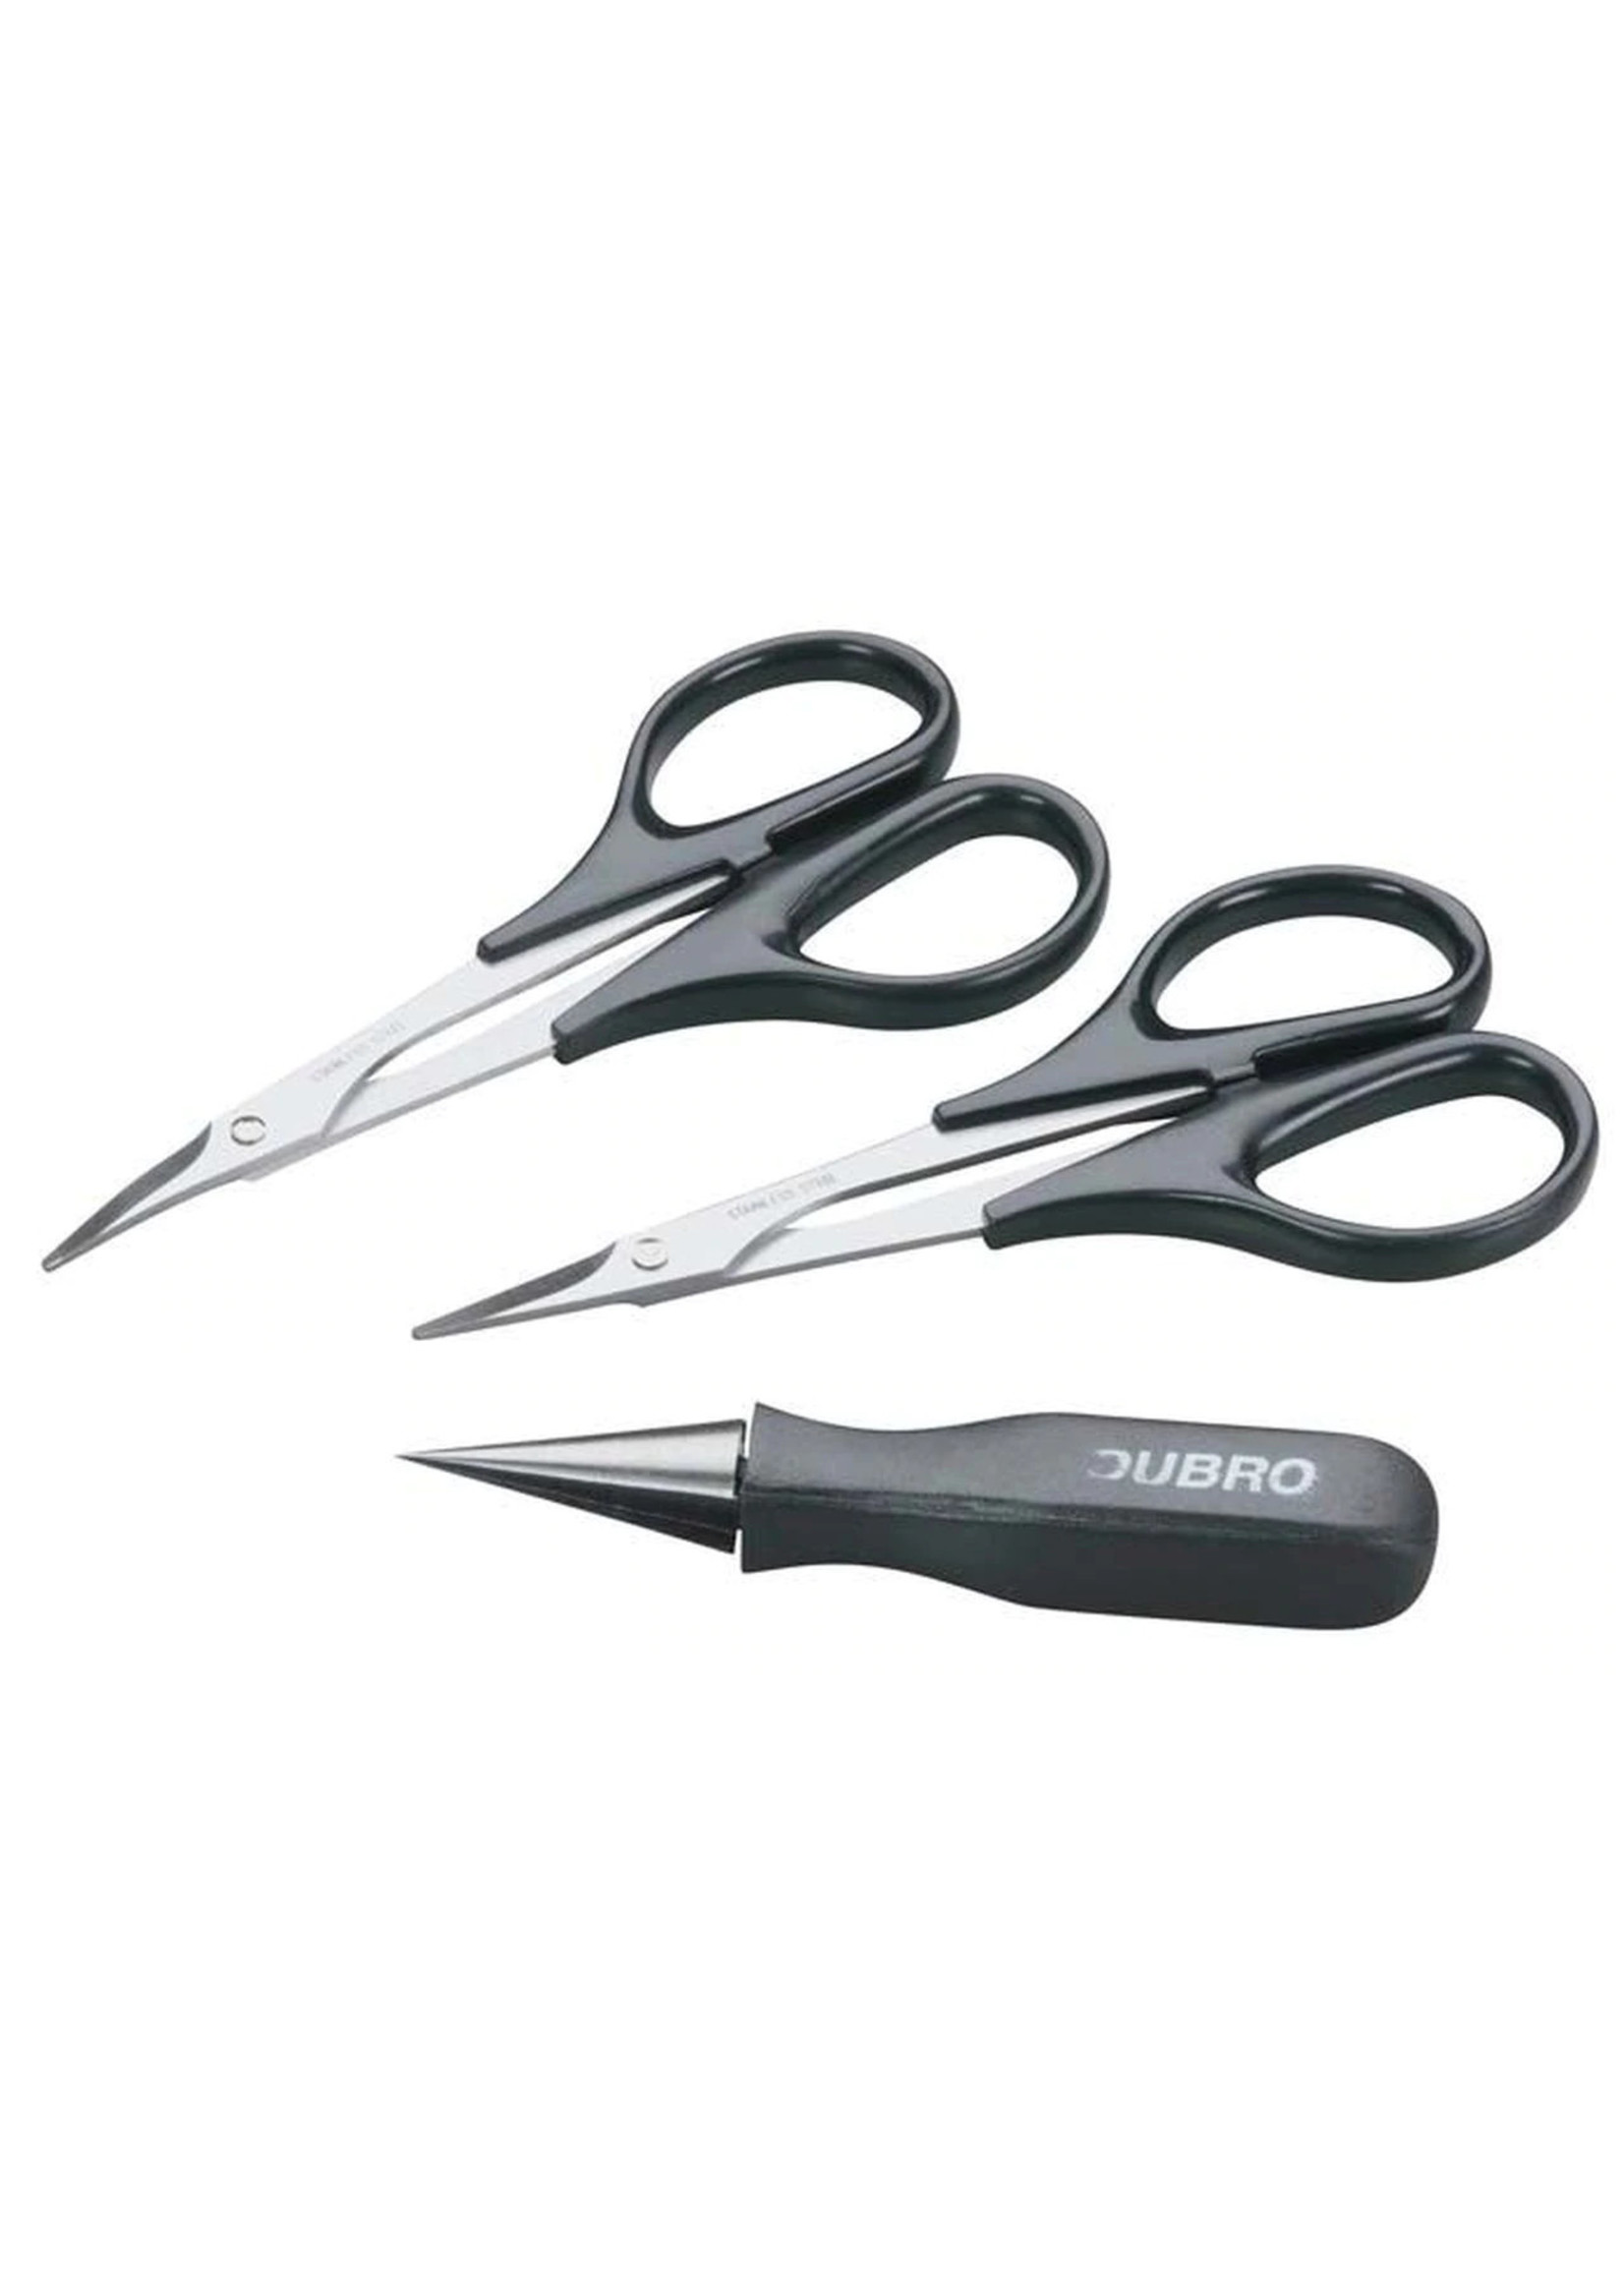 Dubro 2331 - Body Reamer and Scissors (Curved and Straight Blade)